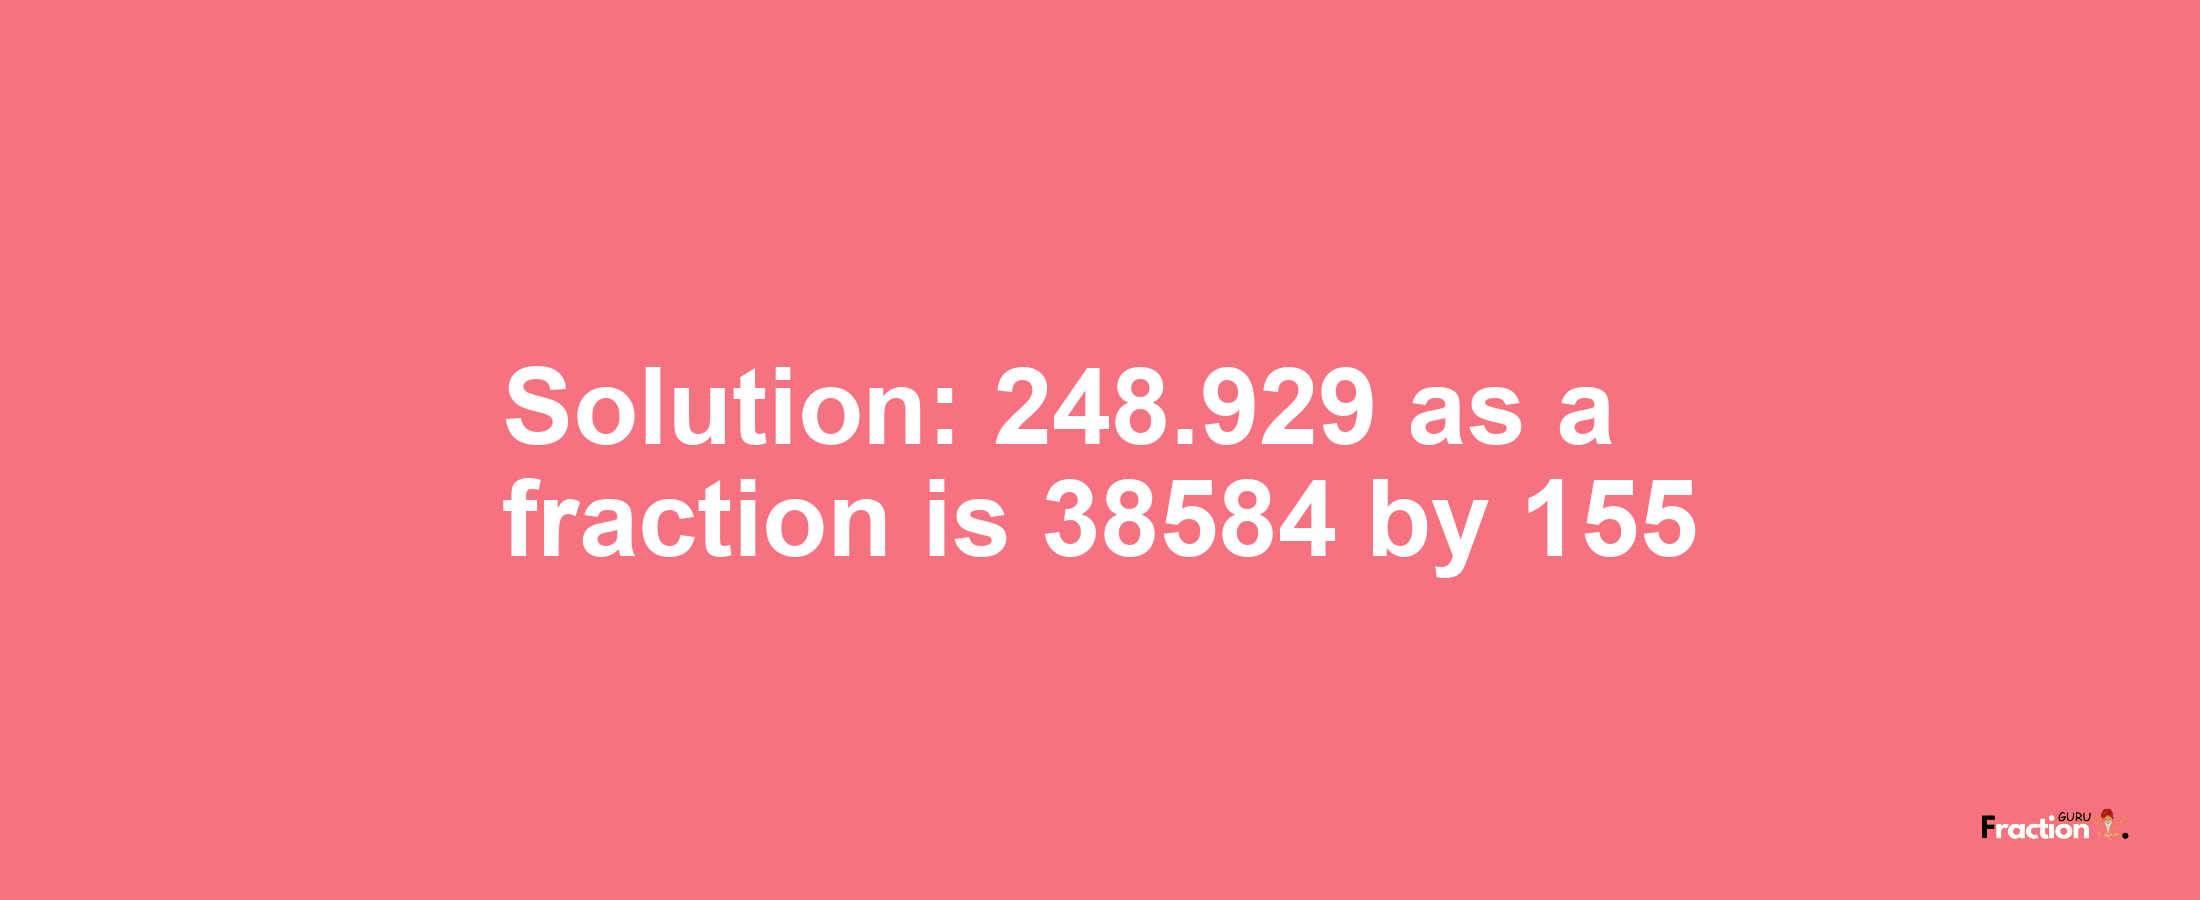 Solution:248.929 as a fraction is 38584/155